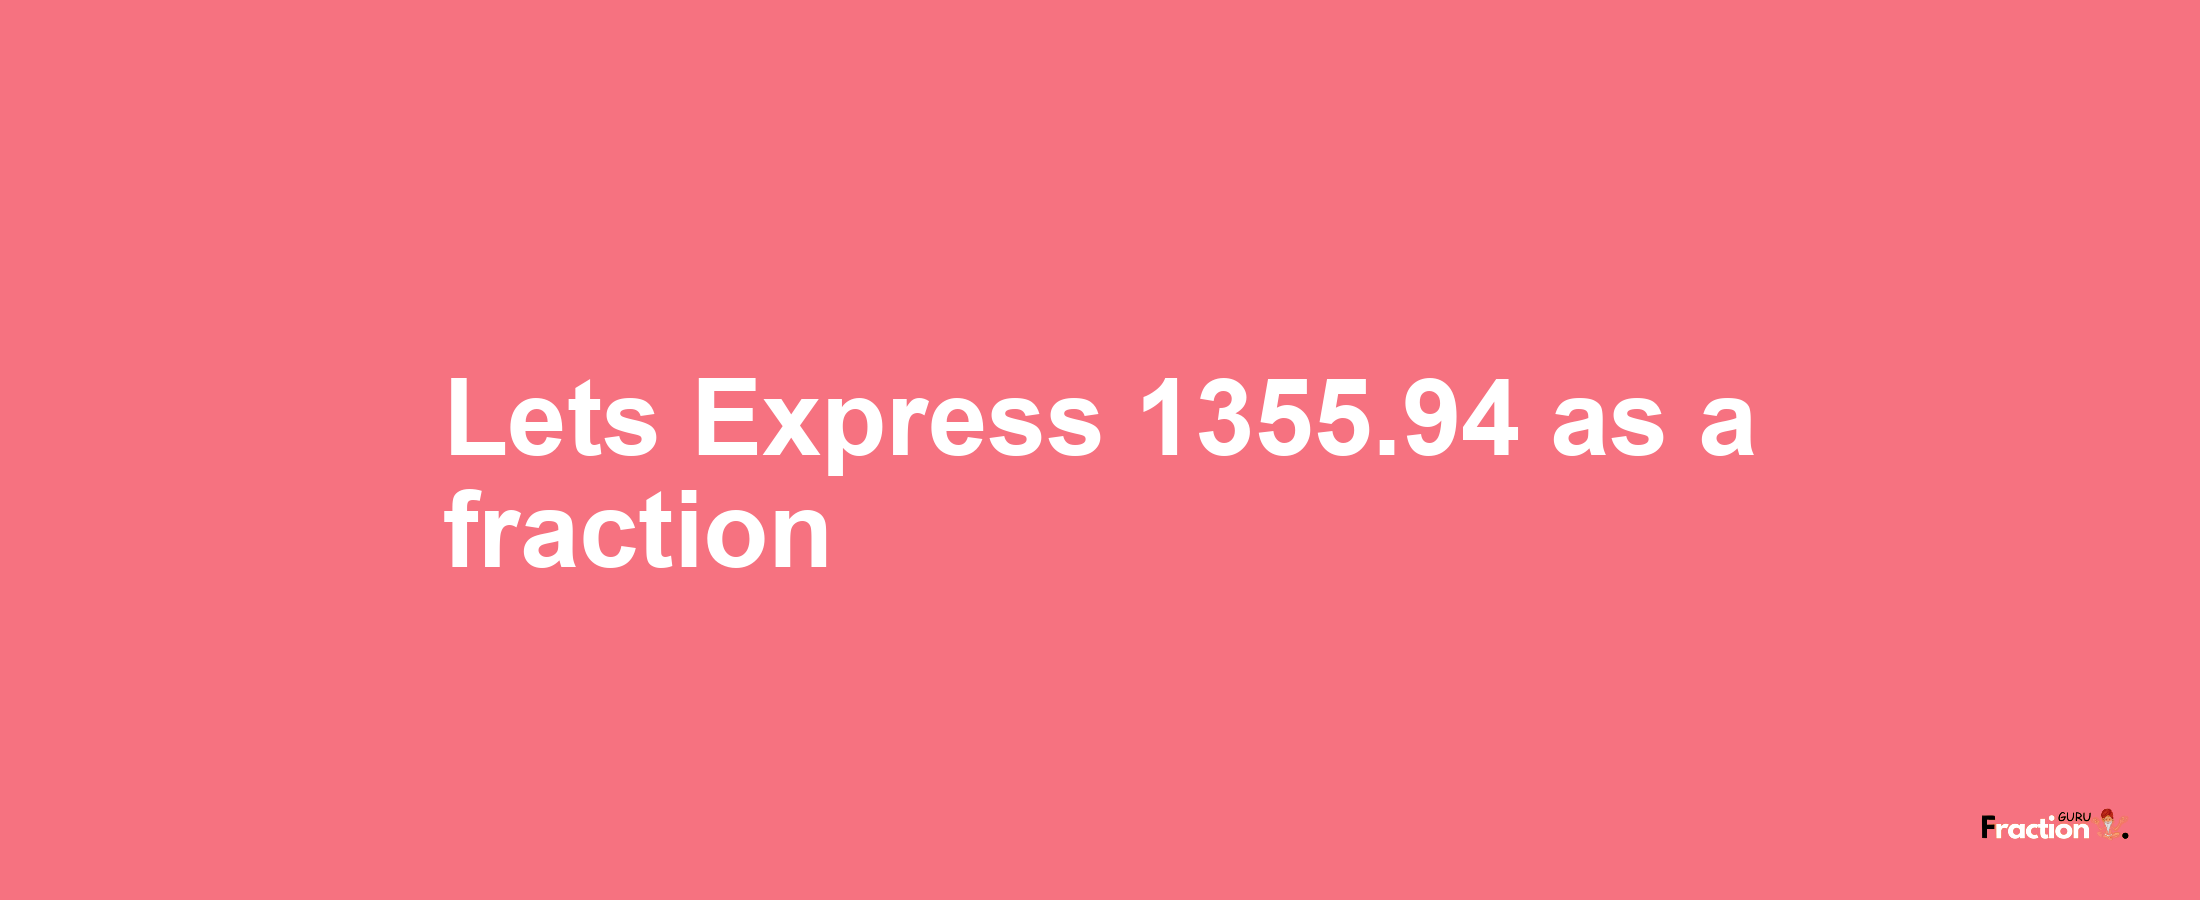 Lets Express 1355.94 as afraction